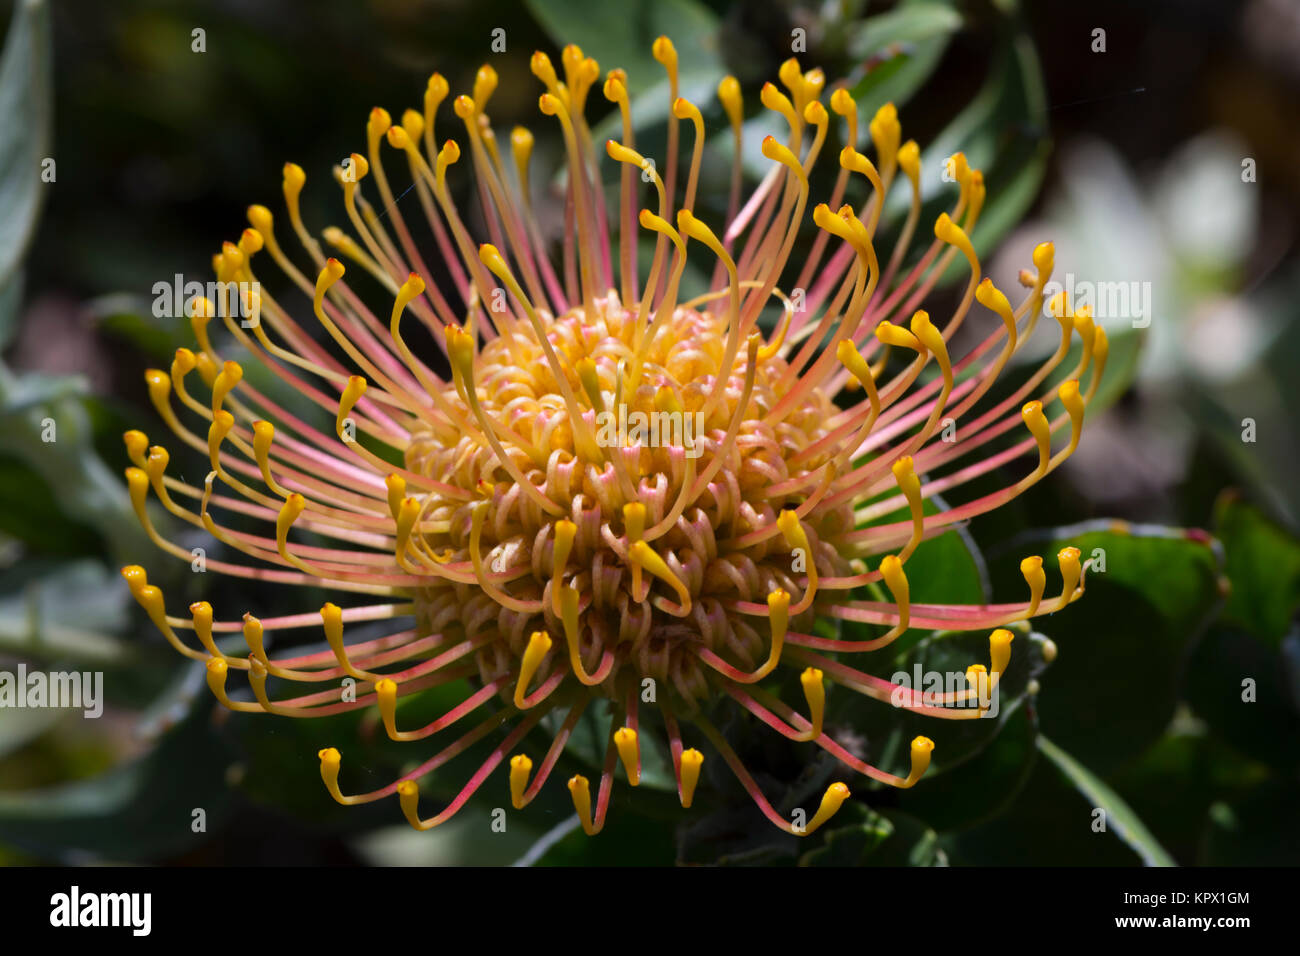 Single Leucospermum Cordifolium, Nodding Pincushion Flowers, which are native to South Africa. In it's natural setting in the garden bed. Stock Photo